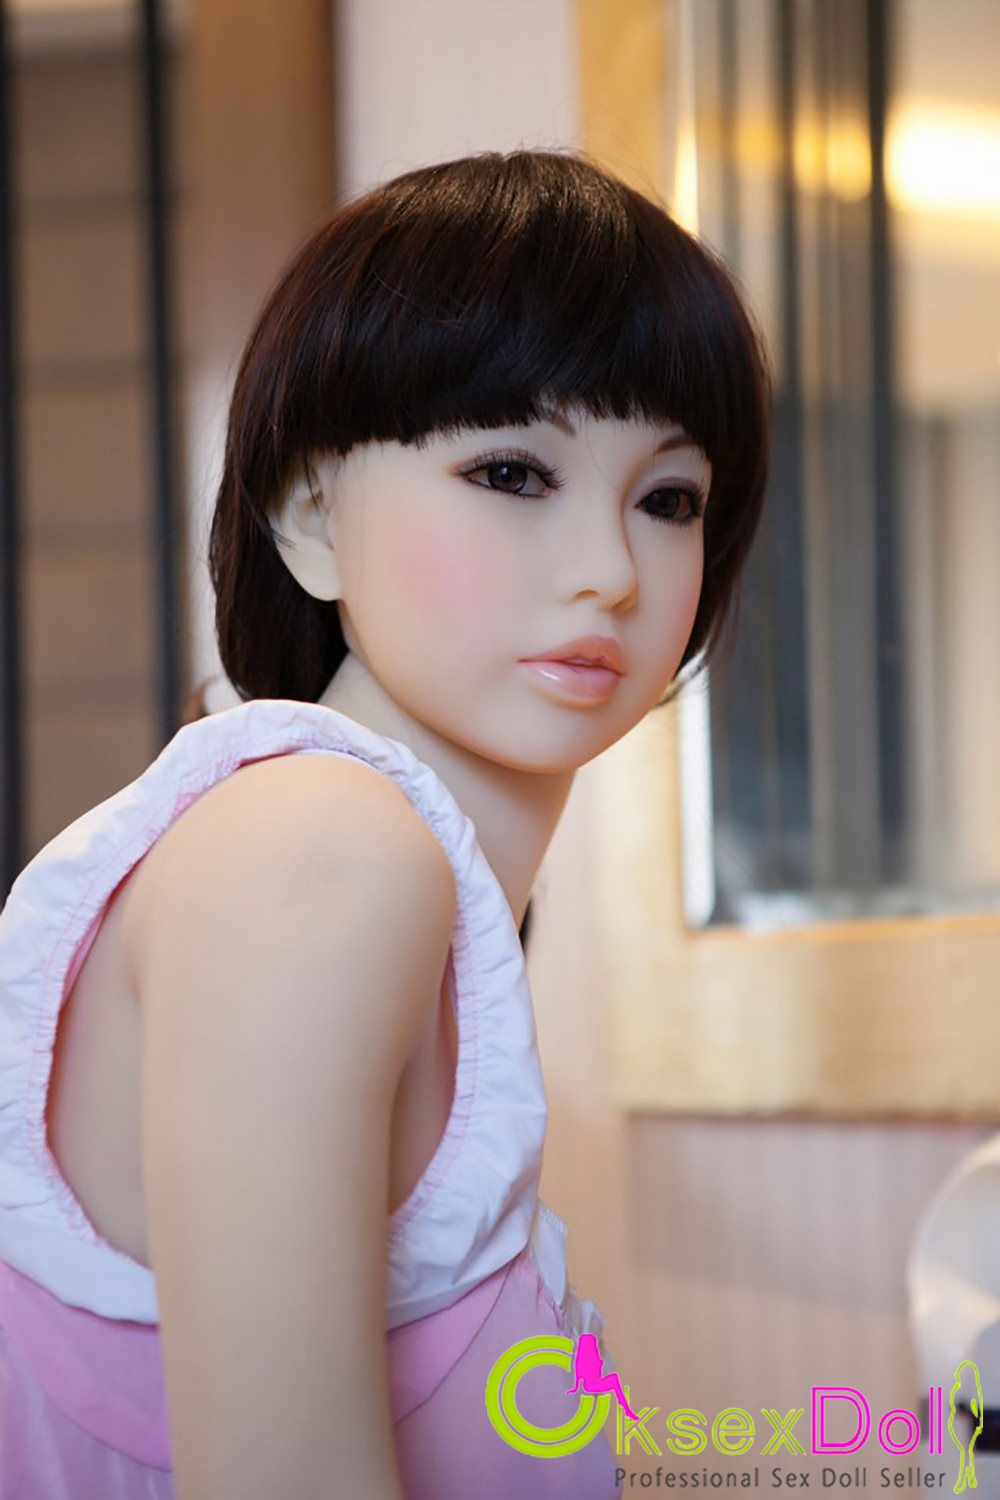 beautiful Chested Sex Doll images